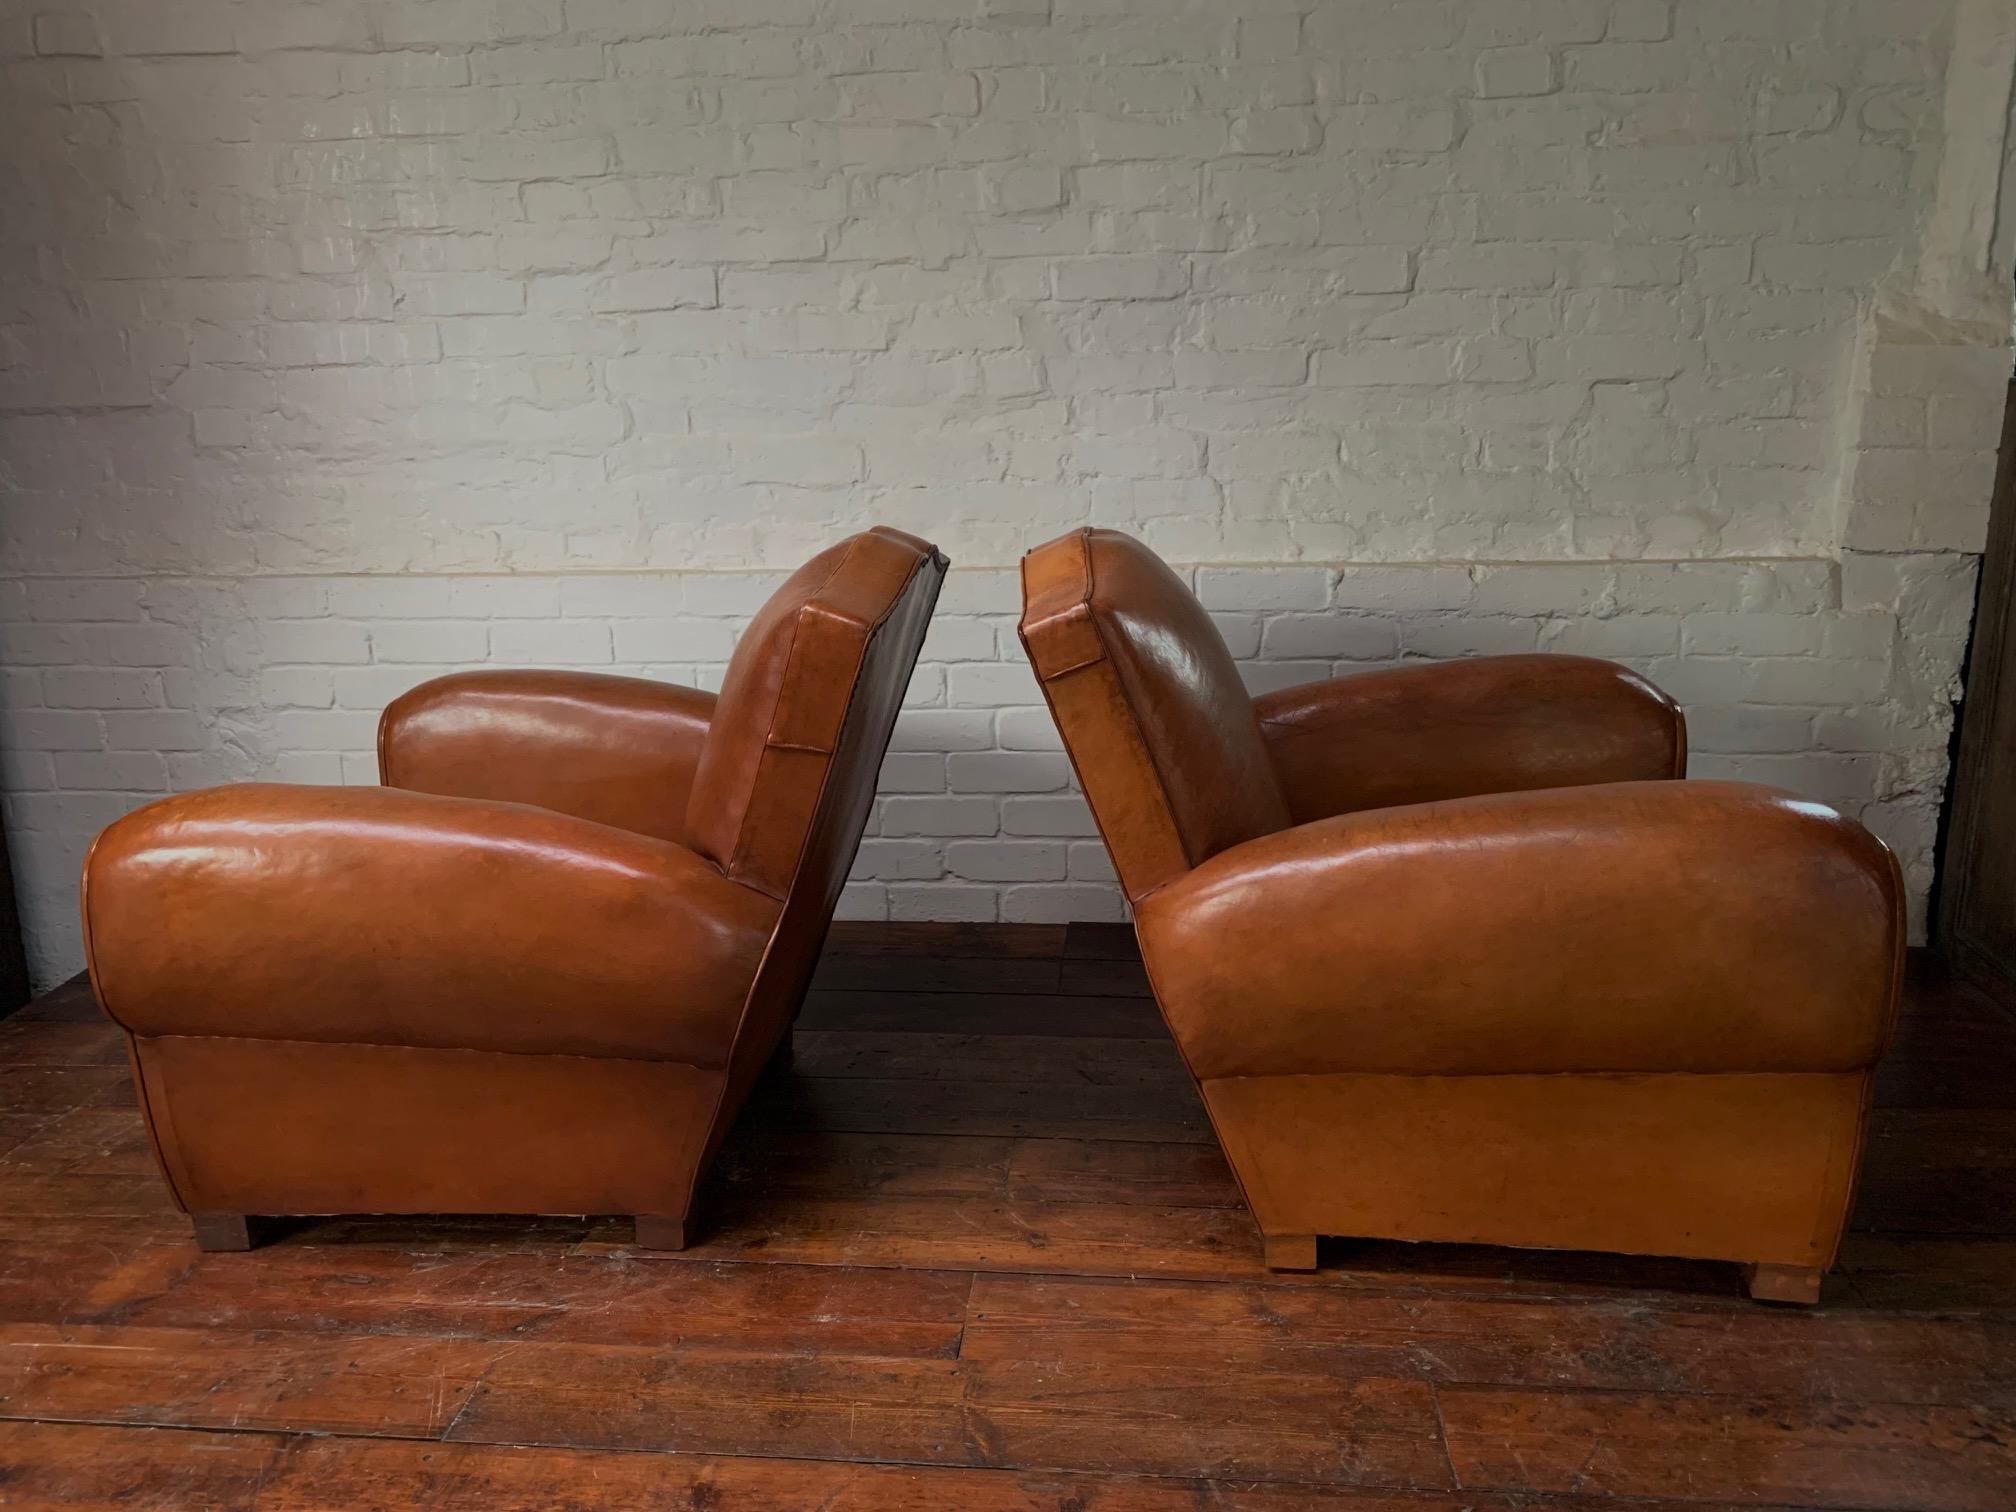 A Stunning Pair of French Leather Club Chairs, Caramel Moustache Models, C1940's 2